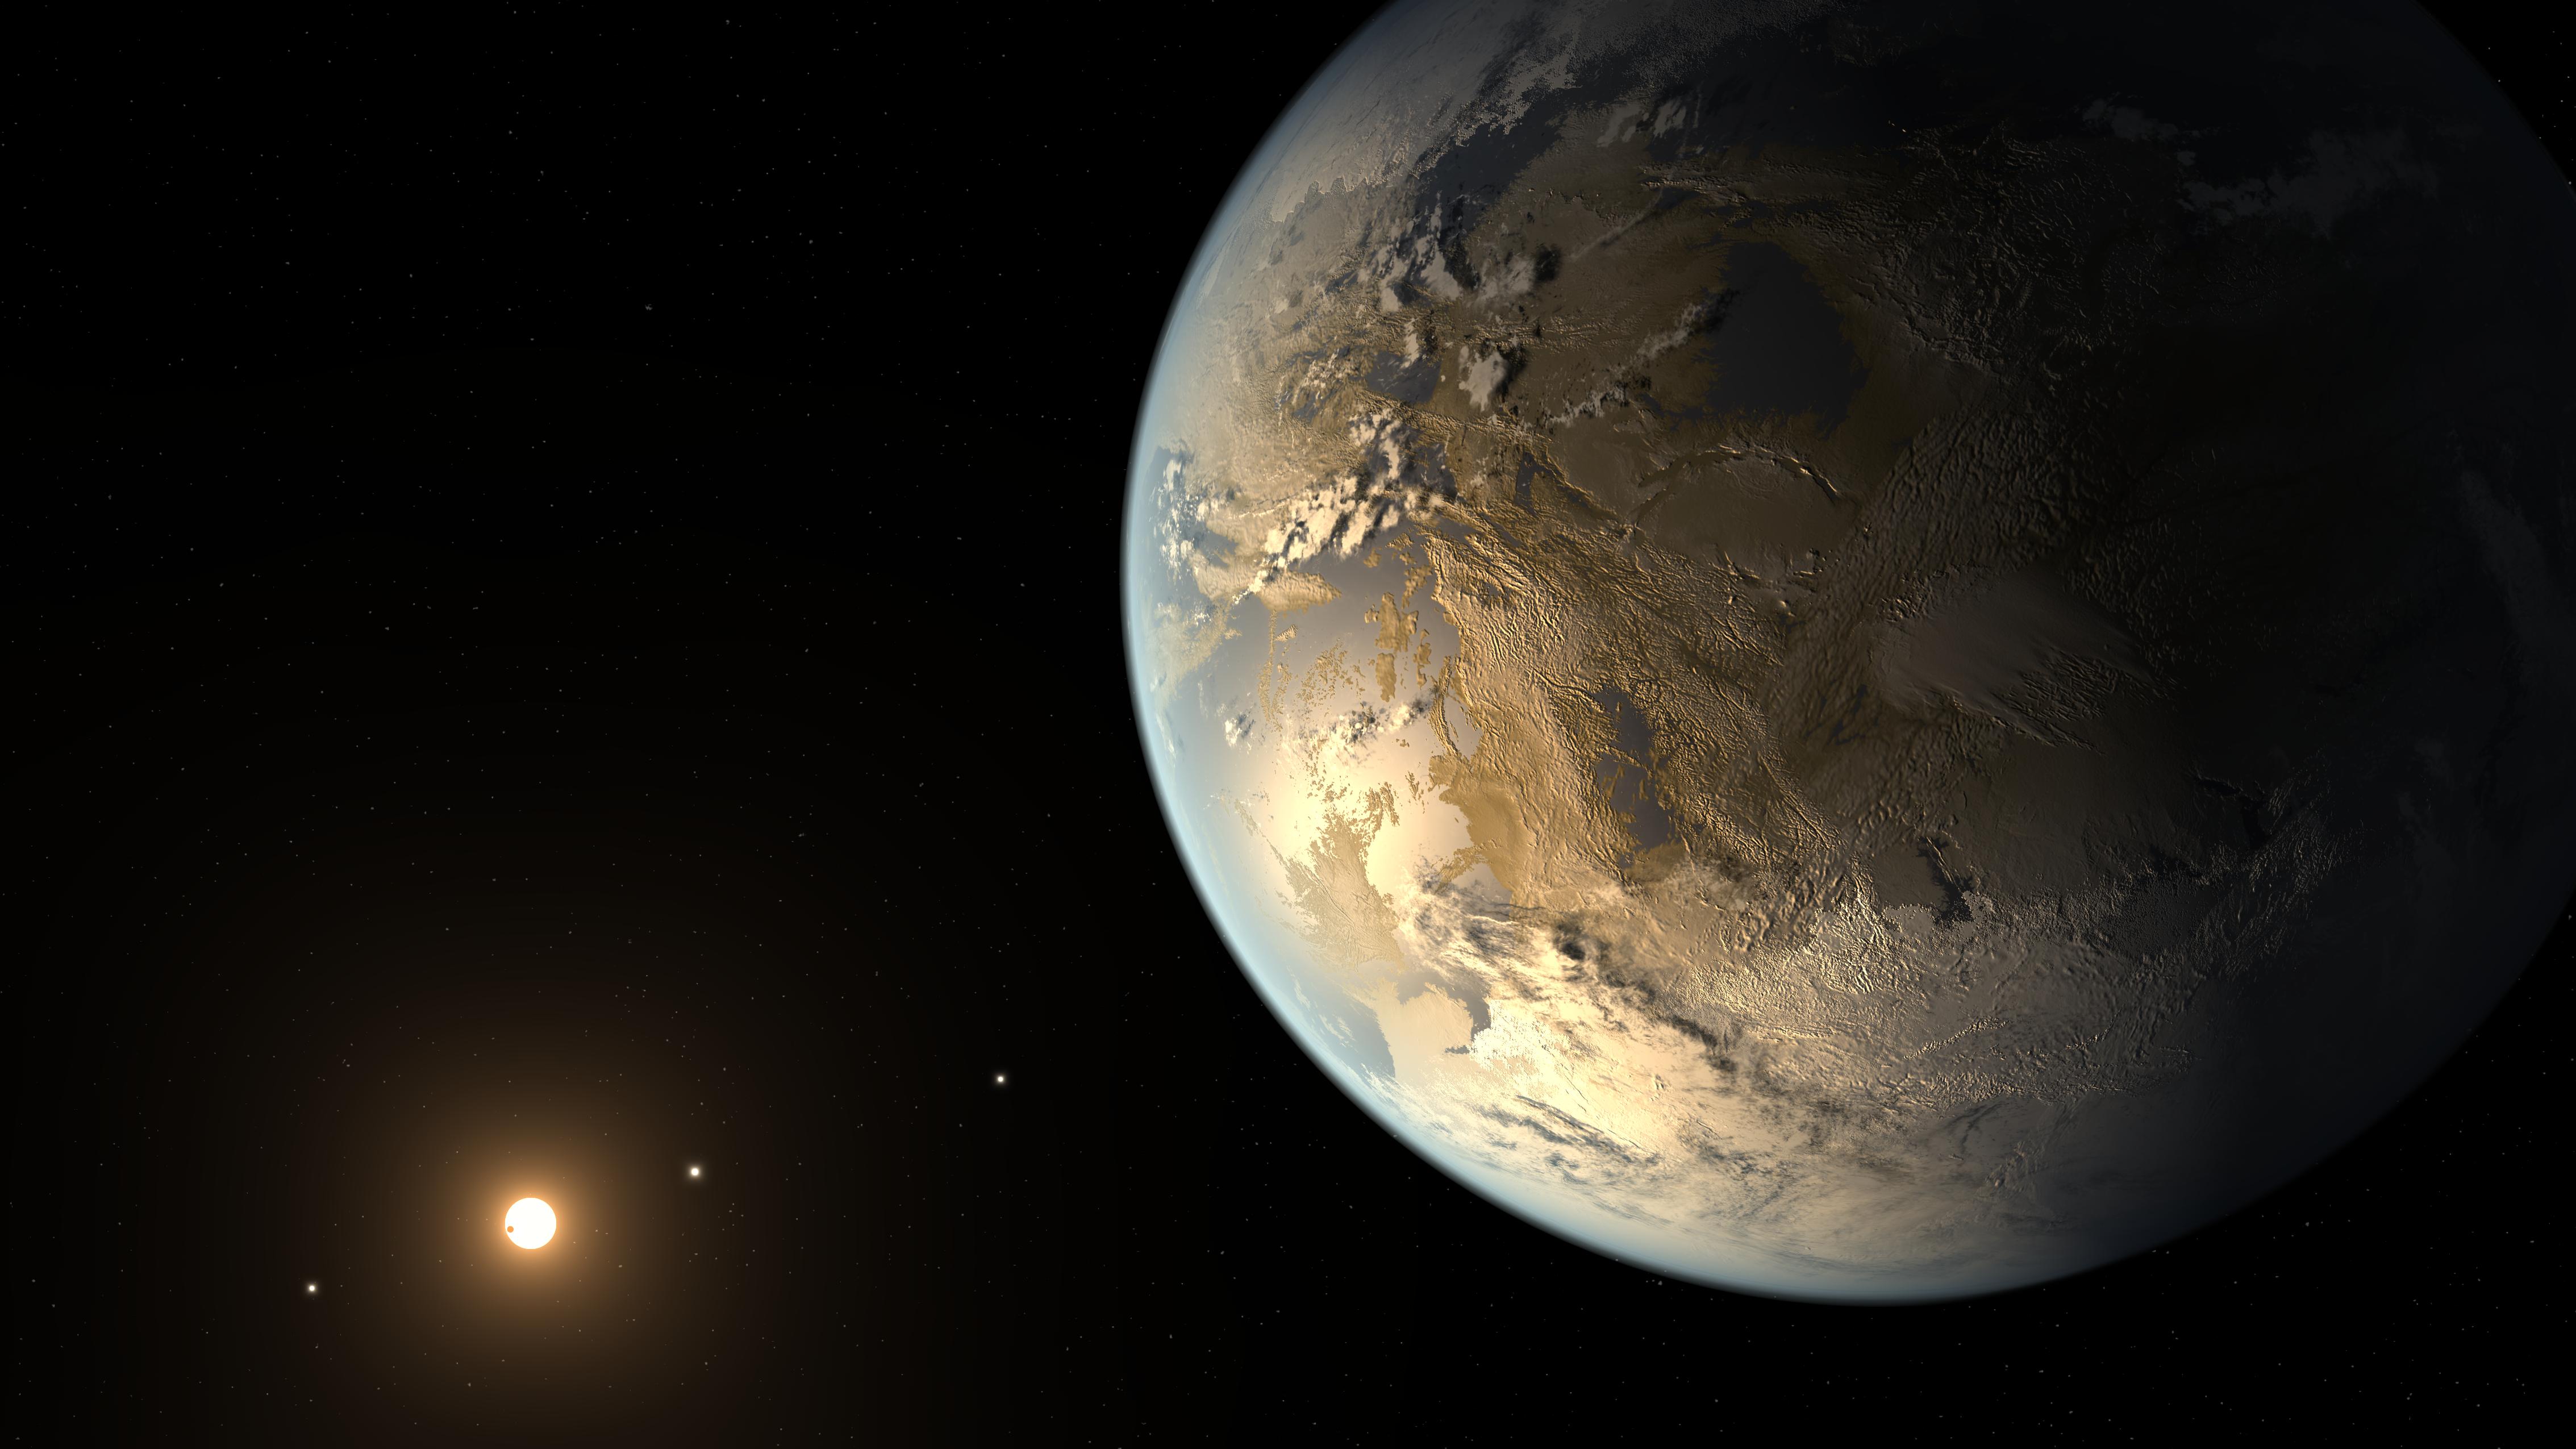 This artist's concept depicts Kepler-186f, the first validated Earth-size planet to orbit a distant star in the habitable zone. The discovery signals a significant step closer to finding a world similar to Earth. The size of Kepler-186f is known to be less than ten percent larger than Earth, but its mass, composition and density are not known. Kepler-186f orbits its star once every 130 days. If you could stand on the surface, the brightness of its star at high noon would appear as bright as our sun is about an hour before sunset on Earth. Kepler-186f resides about 500 light-years from Earth in the constellation Cygnus. The system is also home to four inner planets. Image: NASA/Ames/SETI Institute/JPL-Caltech